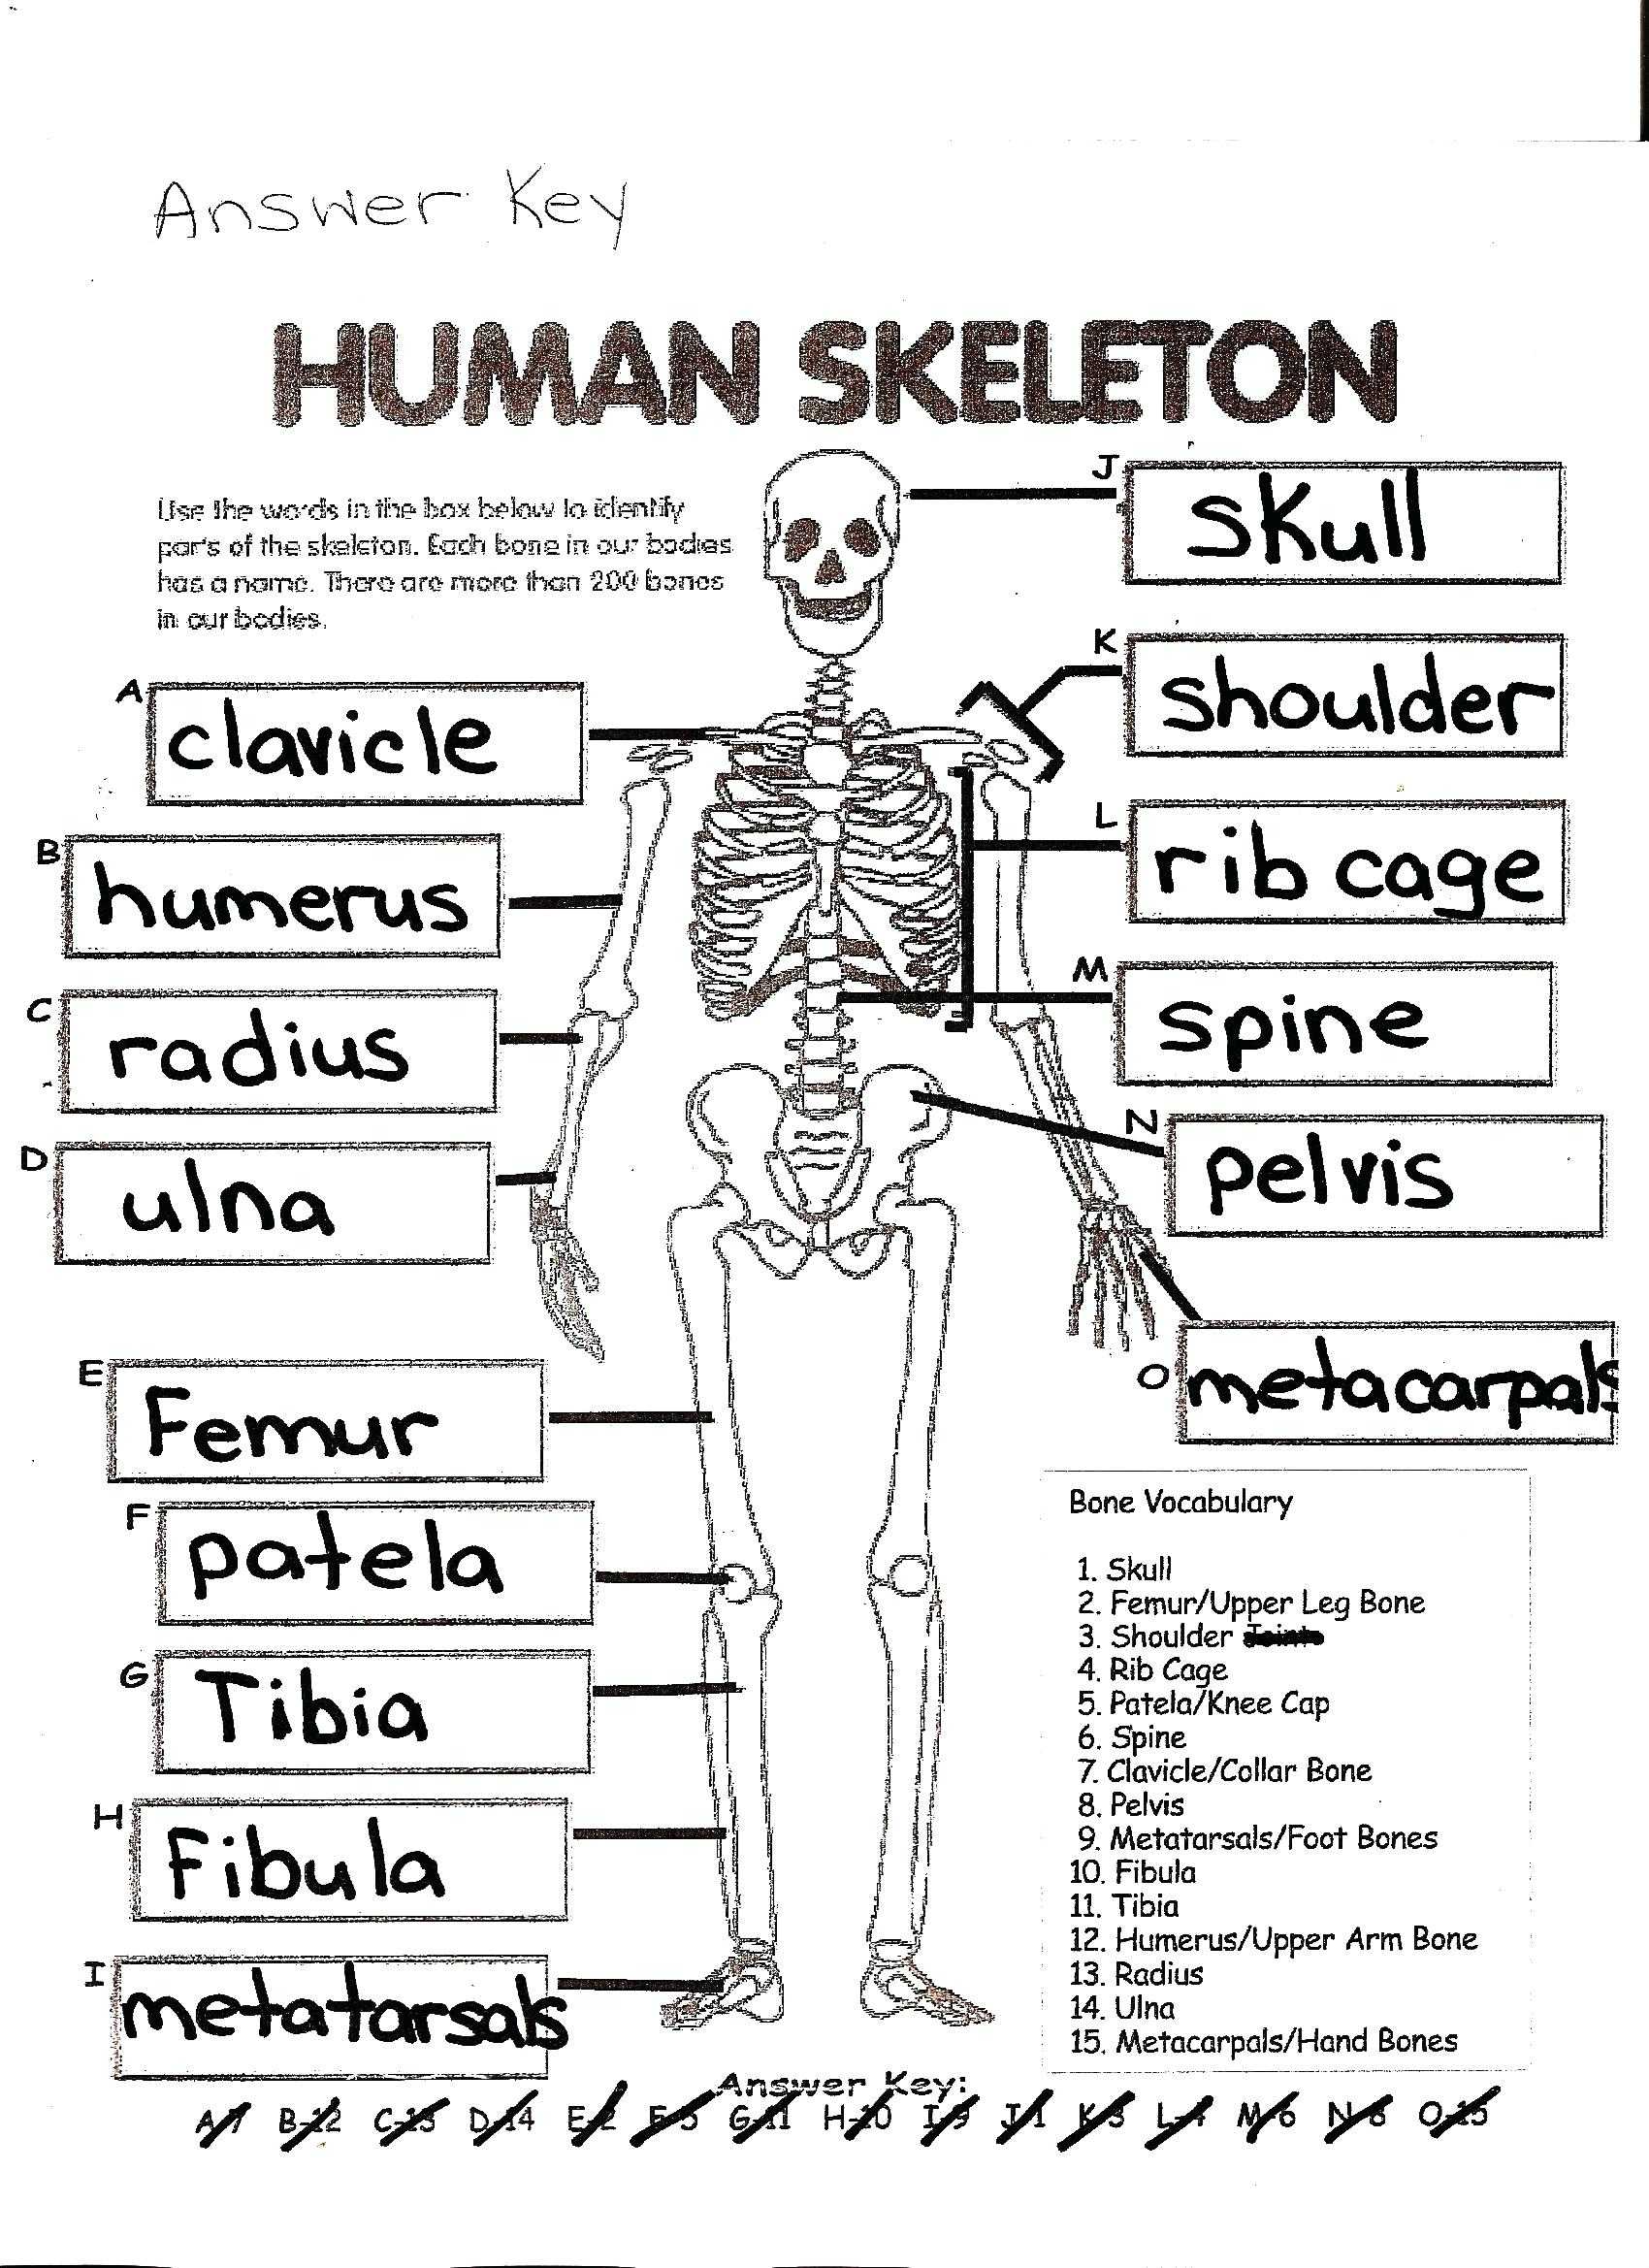 Milliken Publishing Company Worksheet Answers with Ungewöhnlich High School Anatomy and Physiology Worksheets Galerie